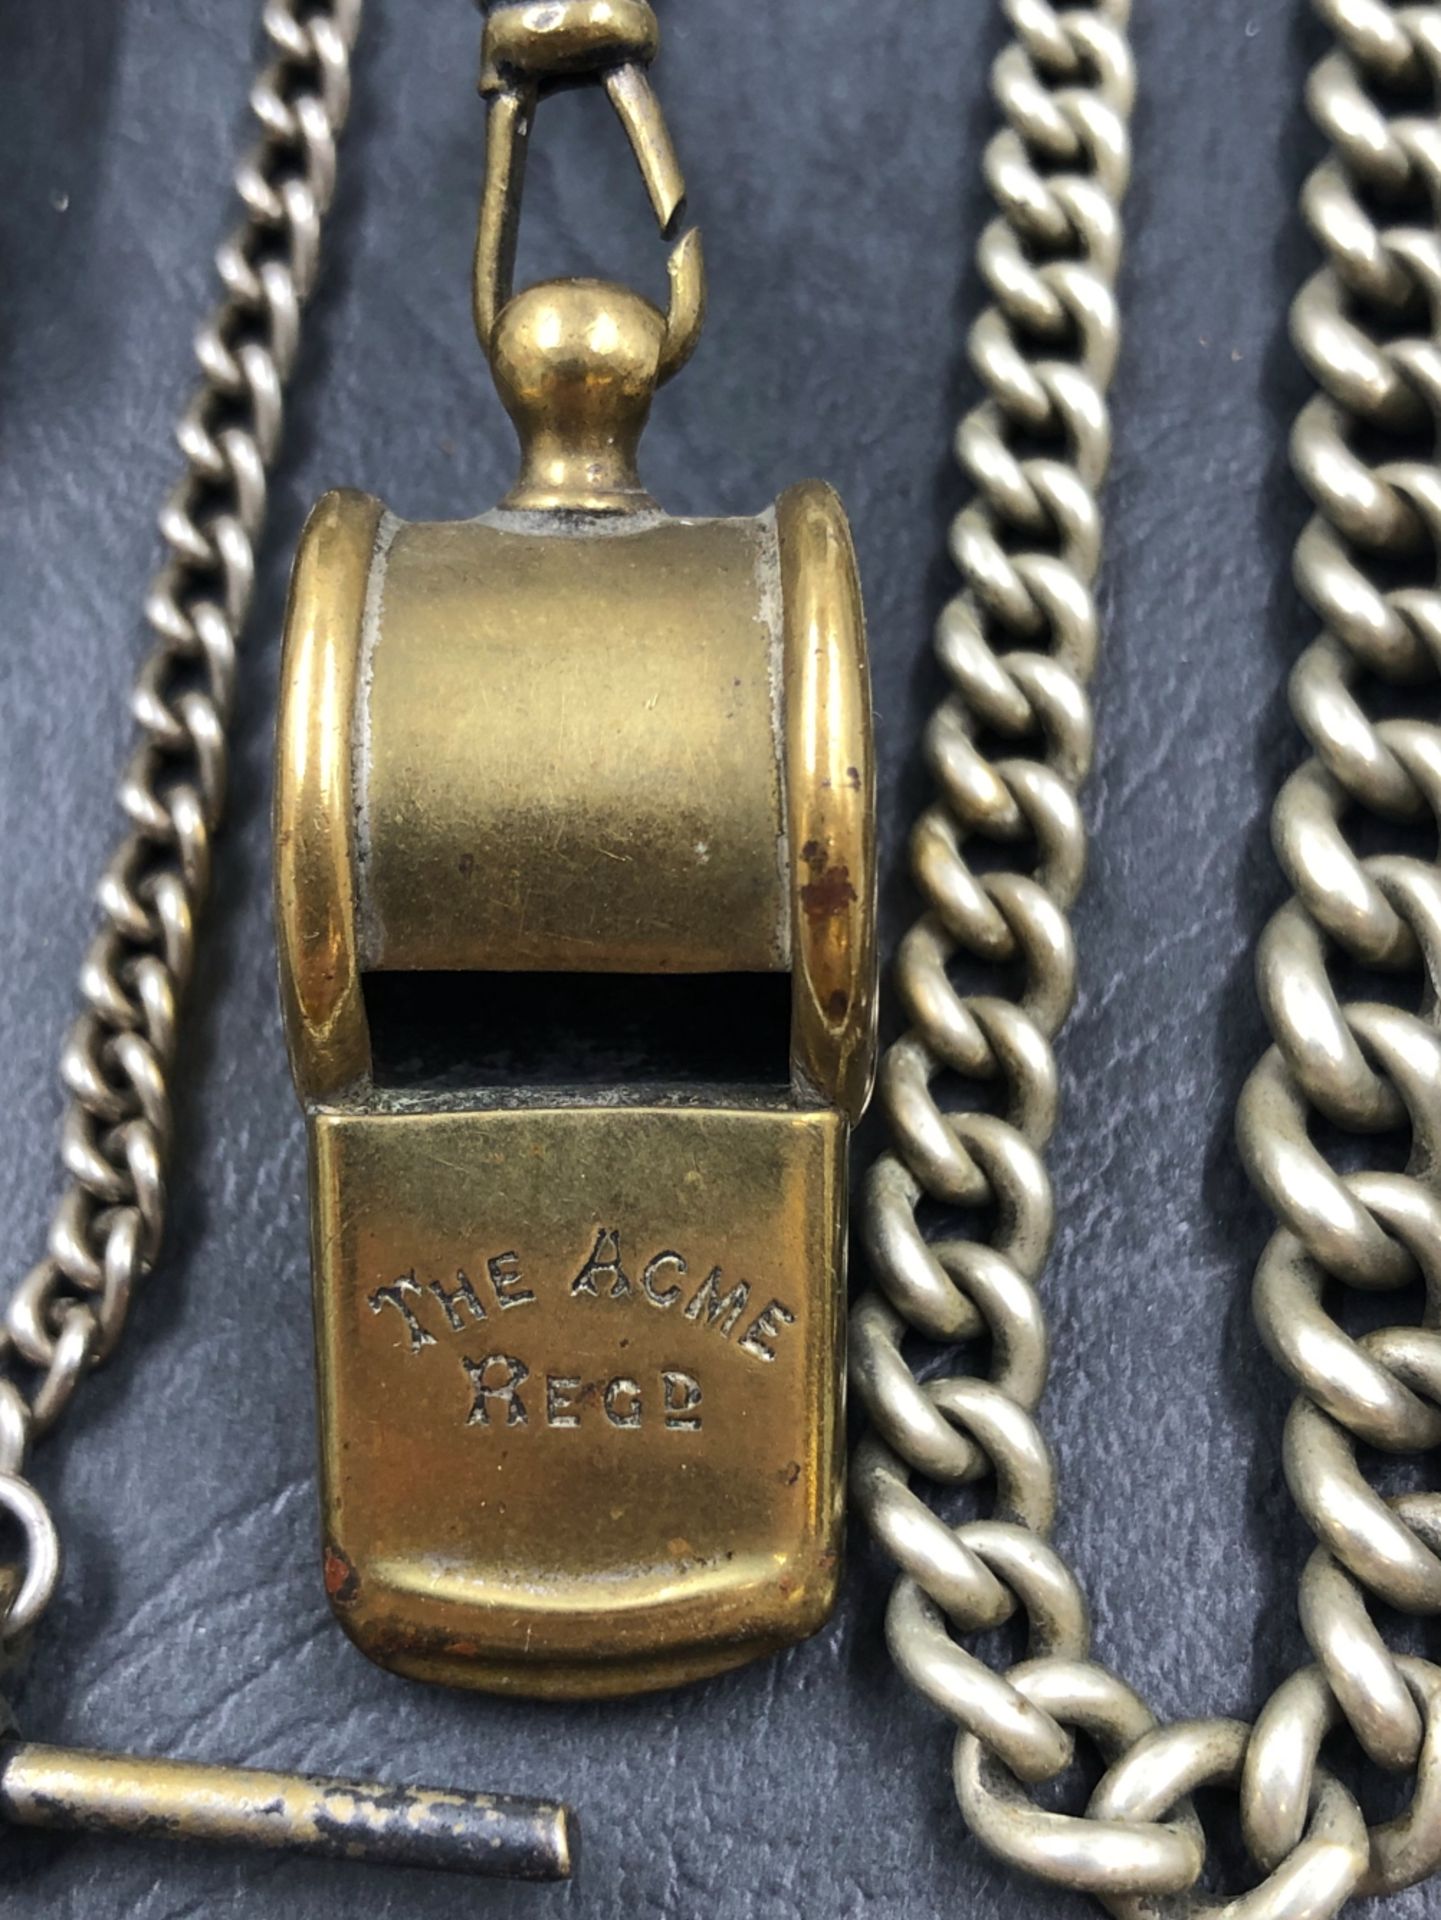 VINTAGE WHISTLES TO INCLUDE EMCA BOY SCOUTS, AN ACME REFEREE ON A GRADUATED ALBERT CHAIN, AN ACME - Image 3 of 5